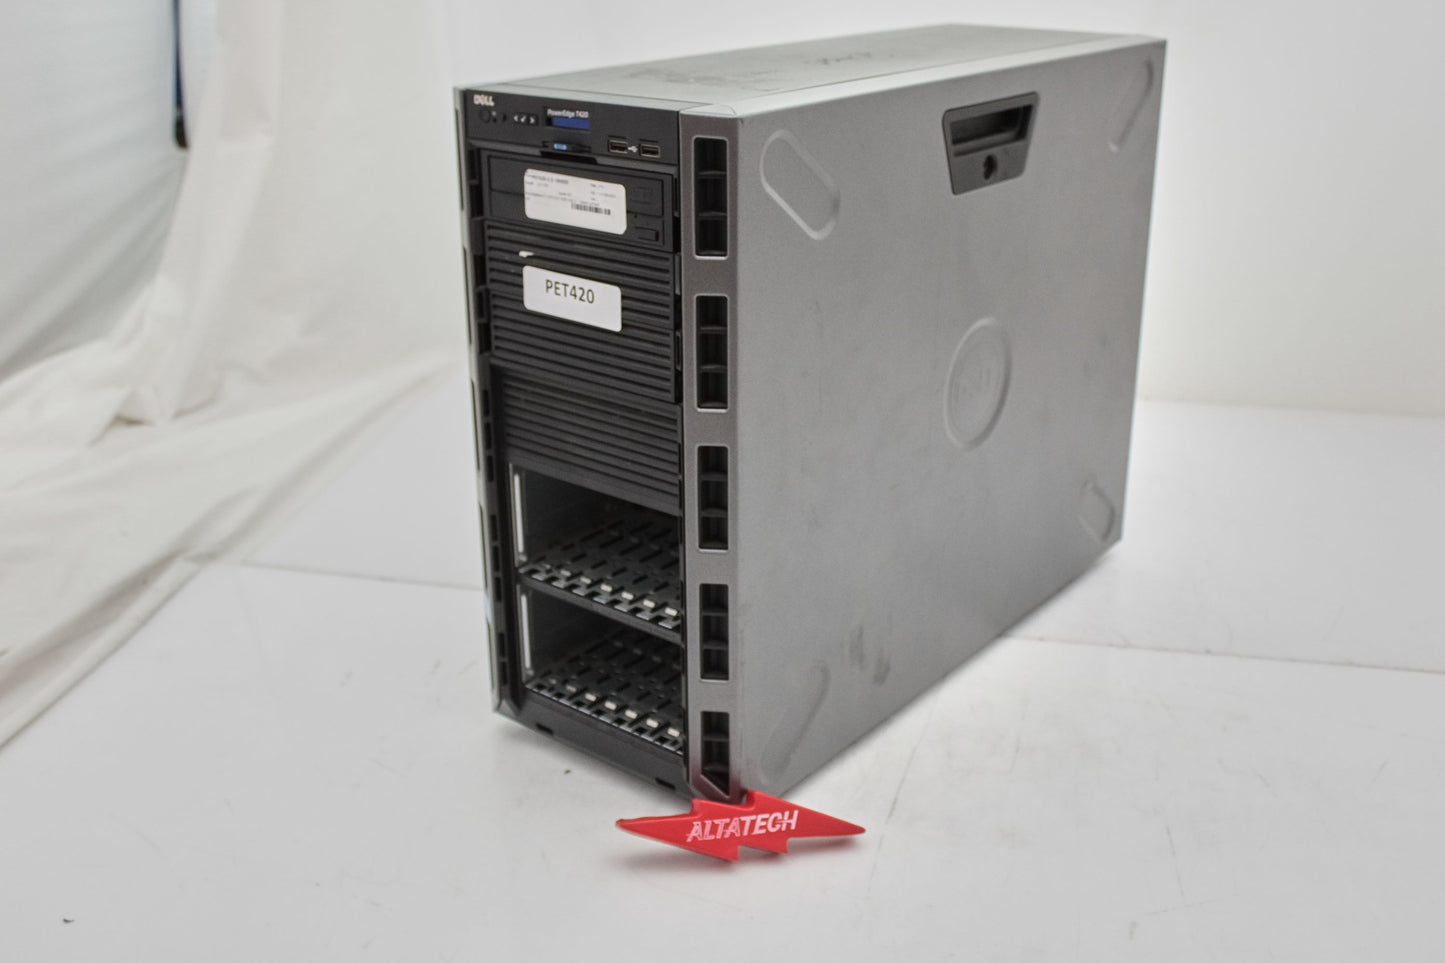 Dell PET420-2.5-16HDD POWEREDGE T420 16X2.5' TOWER SERVER, Used